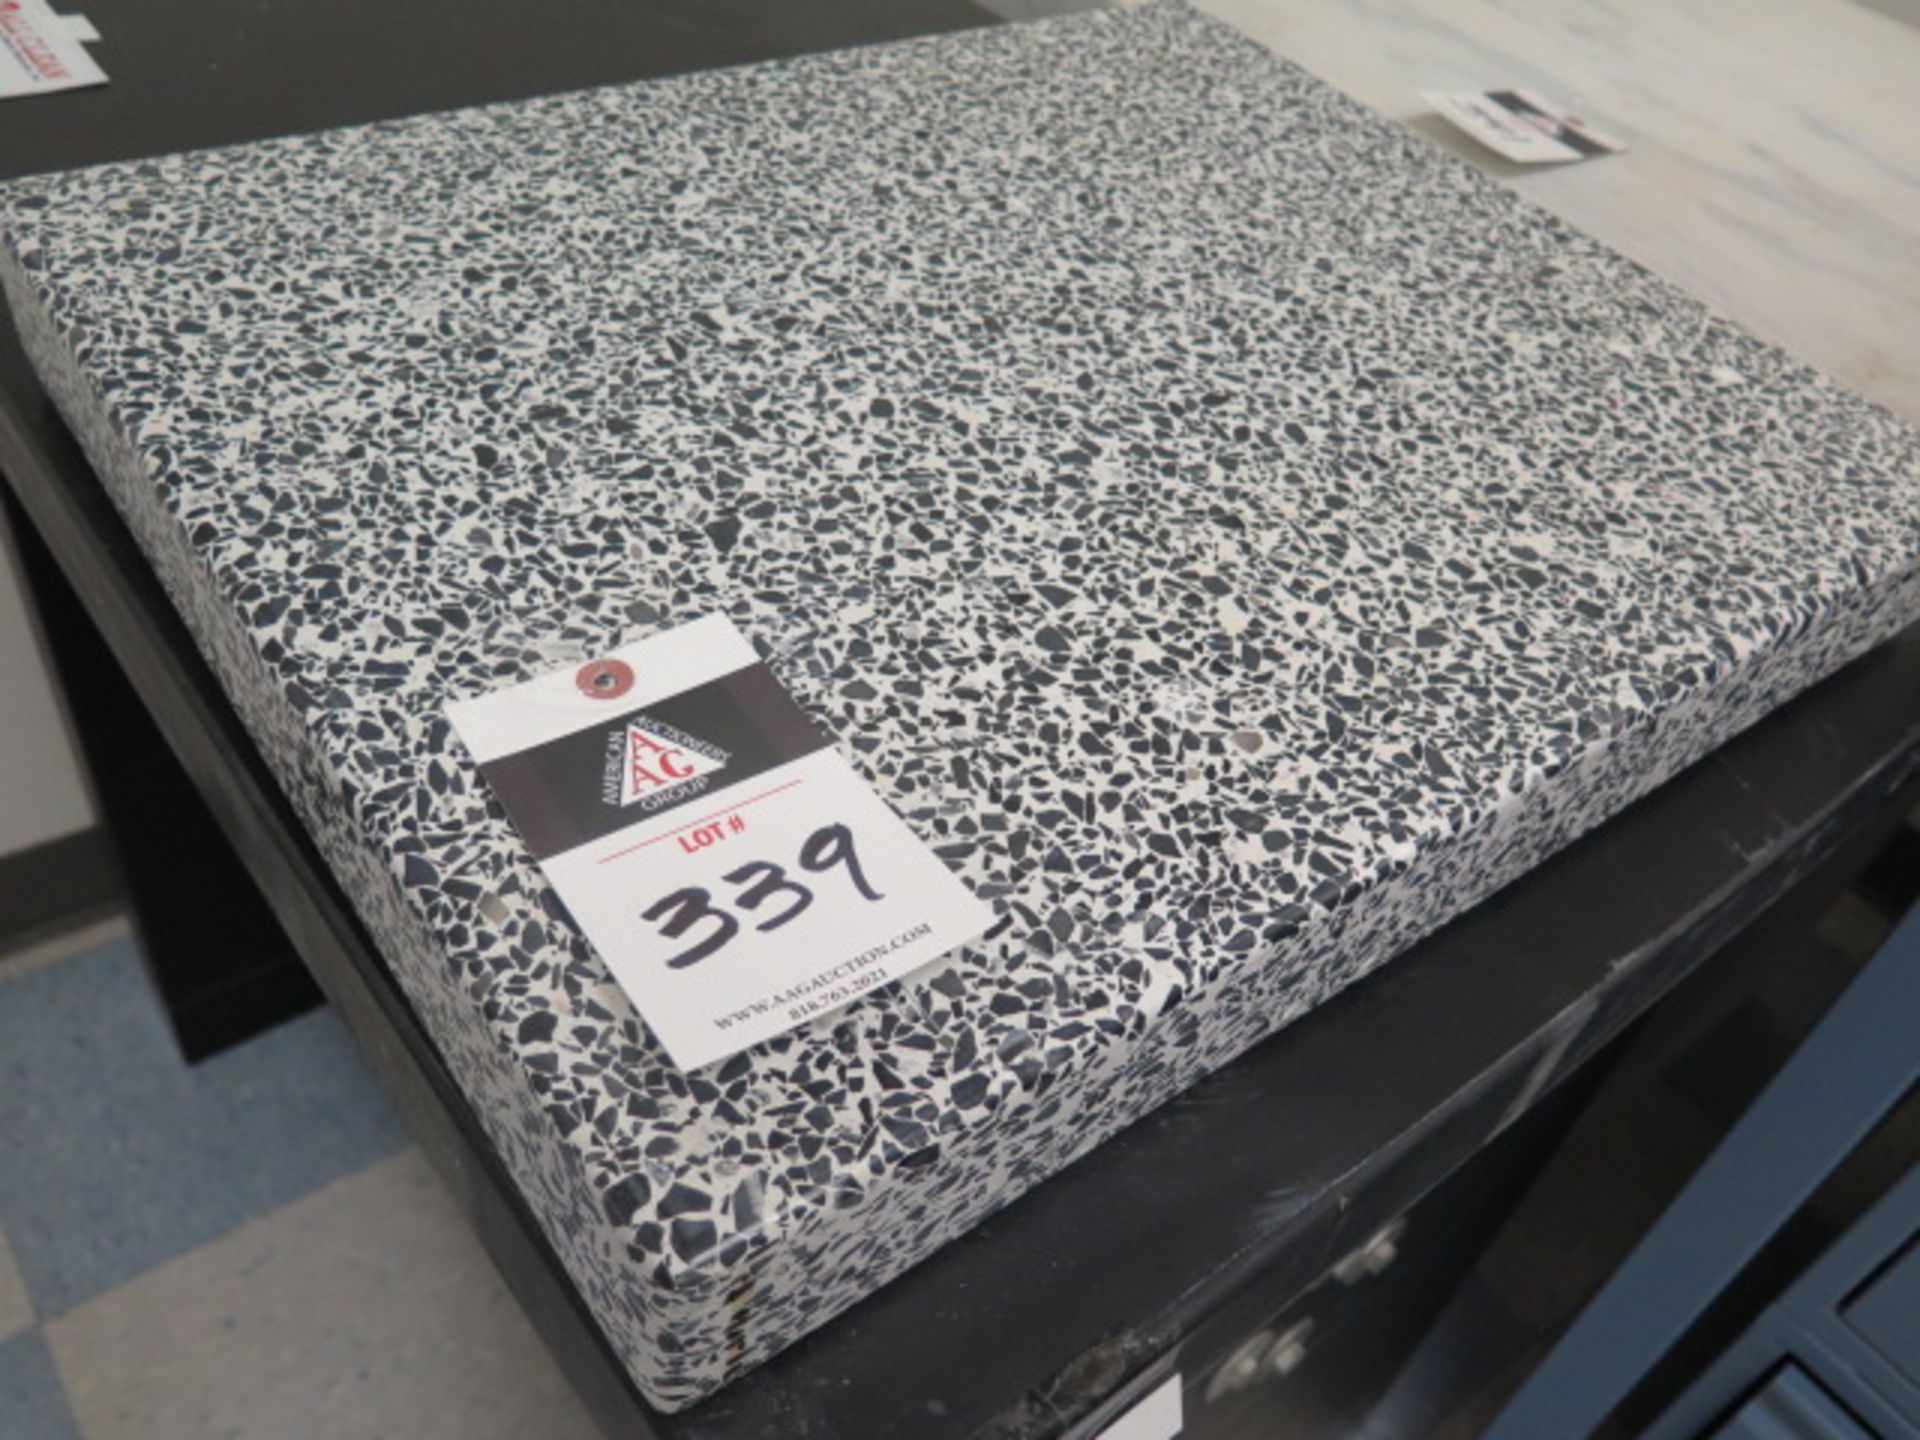 18" x 22" x 3" Granite Surface Plate (SOLD AS-IS - NO WARRANTY)